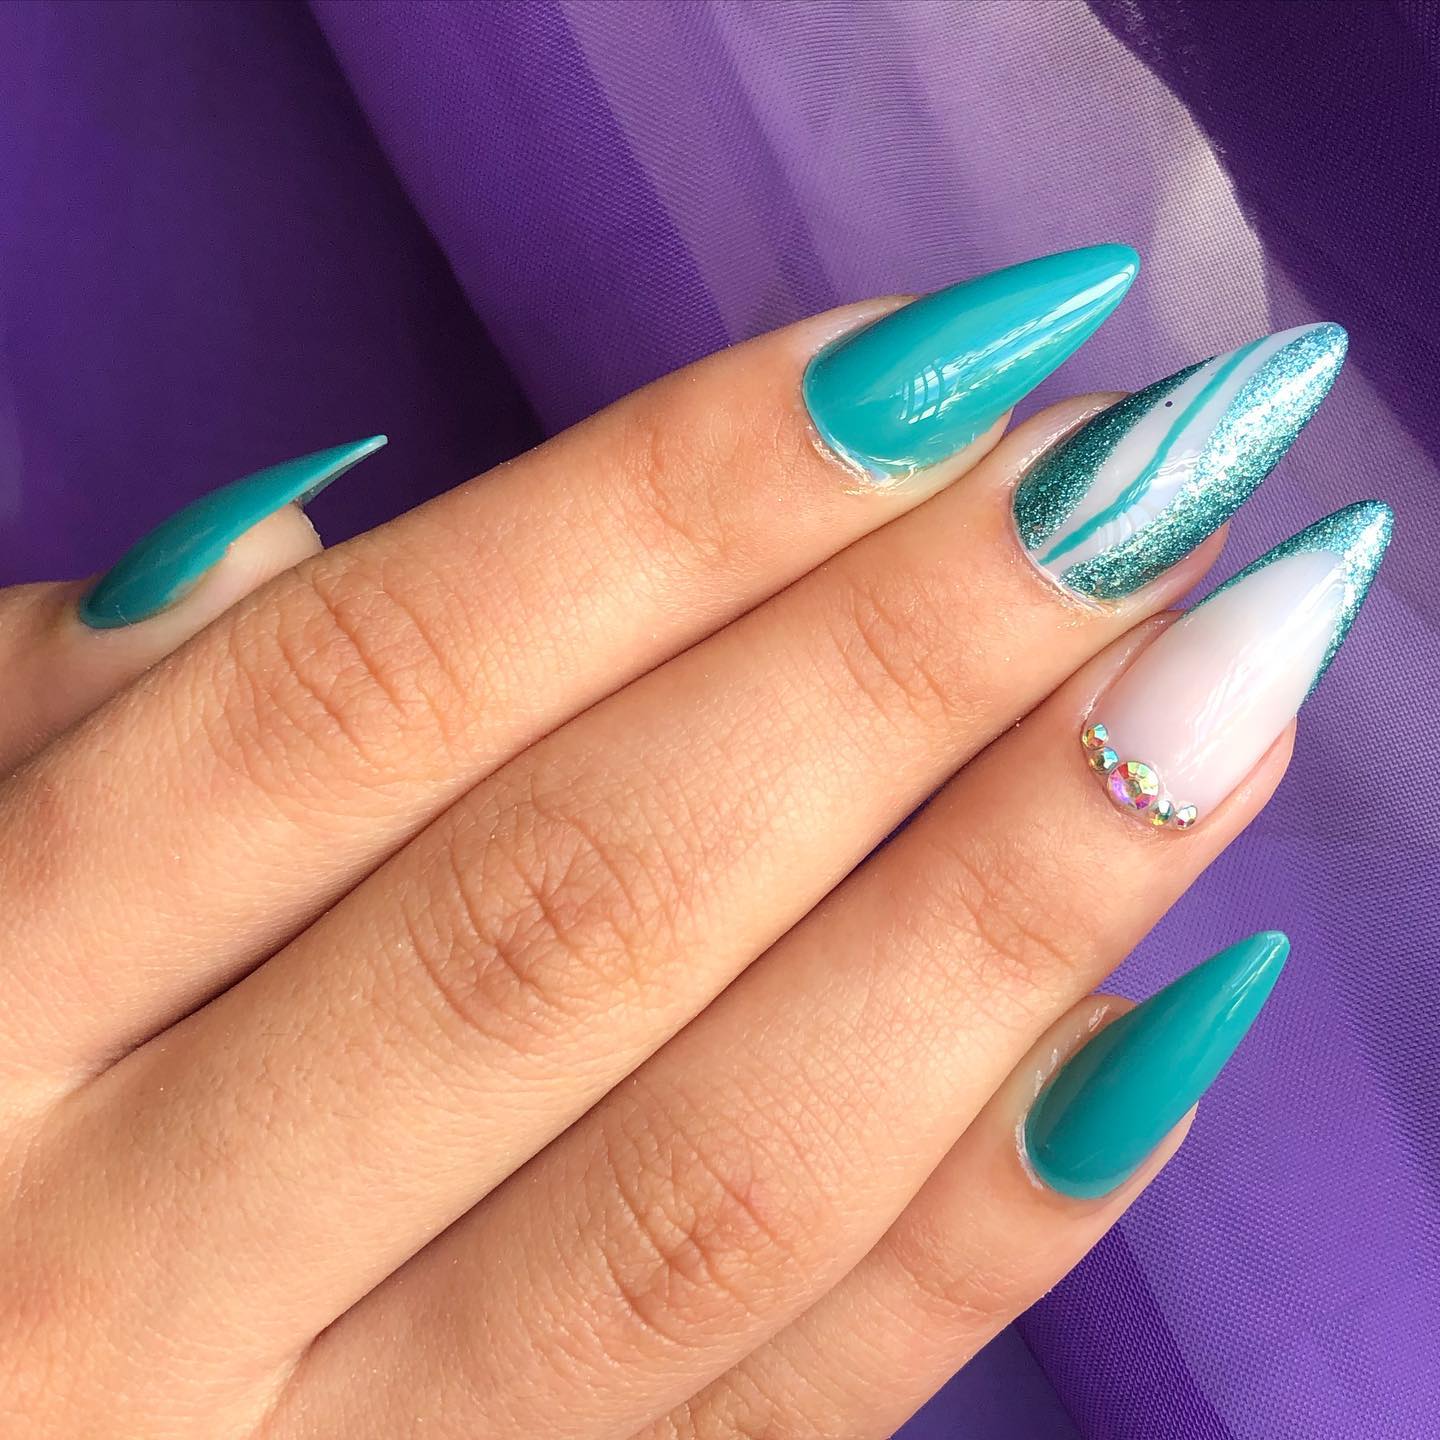 It's between green and blue color, isn't it? If you like this shade of green, you should definitely use it with these swirl and stone nail arts.